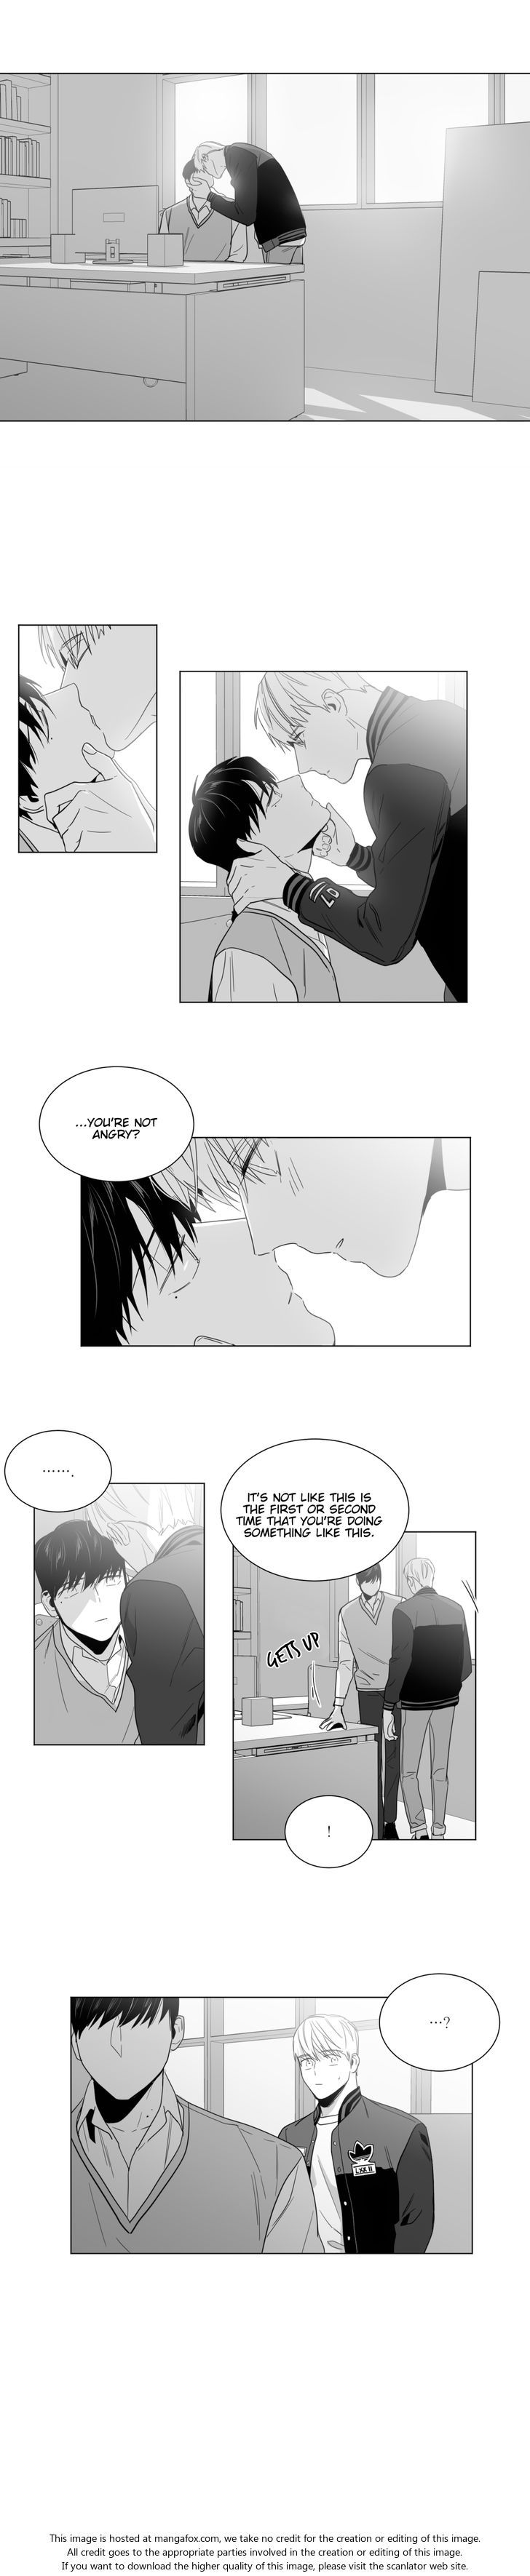 Lover Boy (Lezhin) Chapter 025 page 6